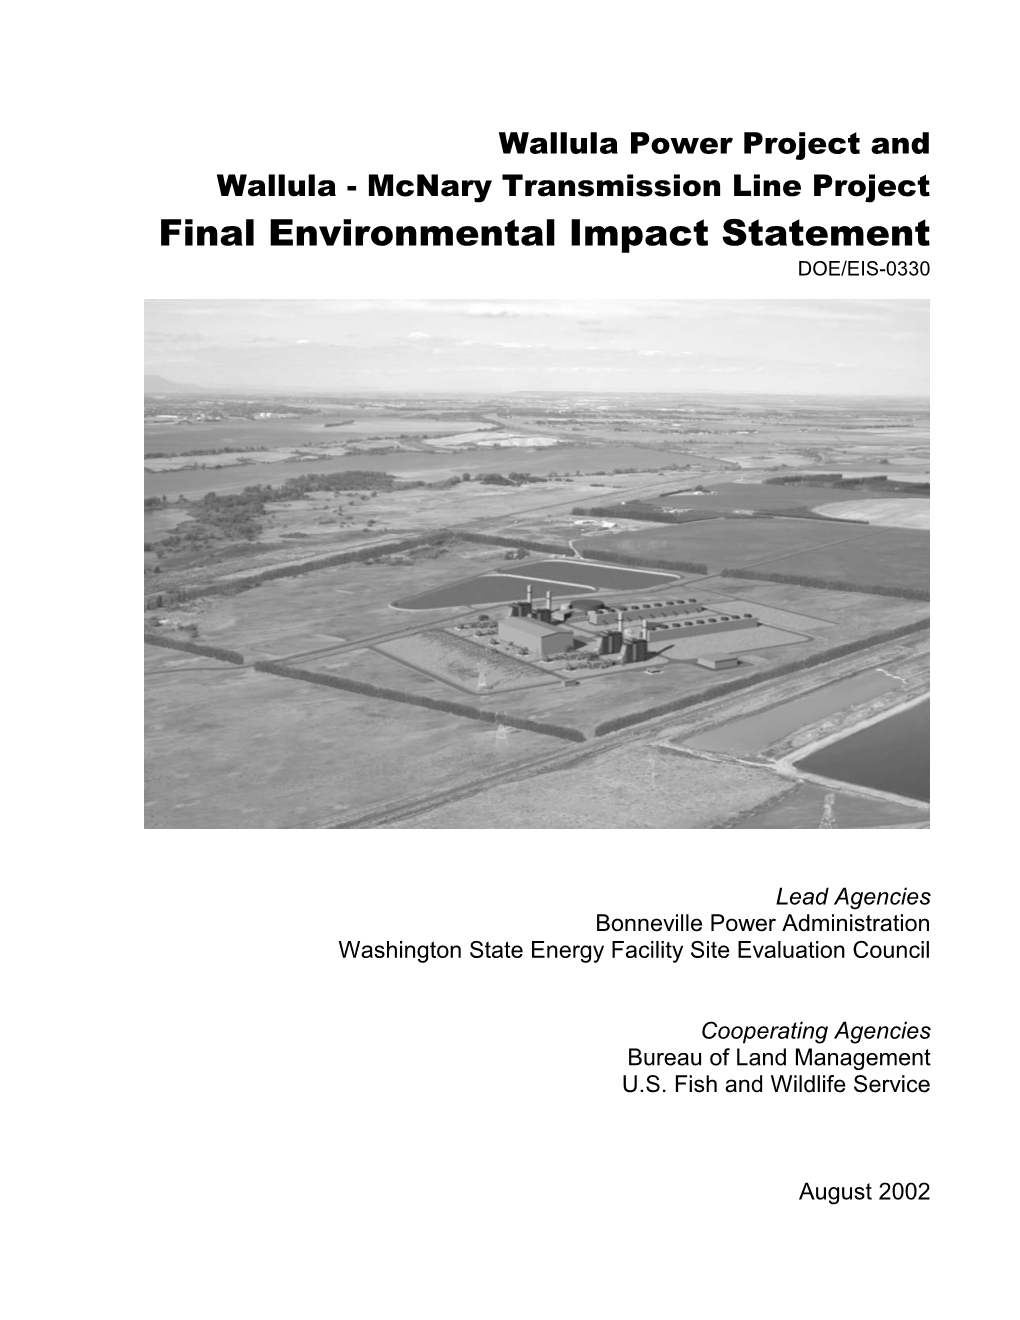 Mcnary Transmission Line Project, Final Environmental Impact Statement